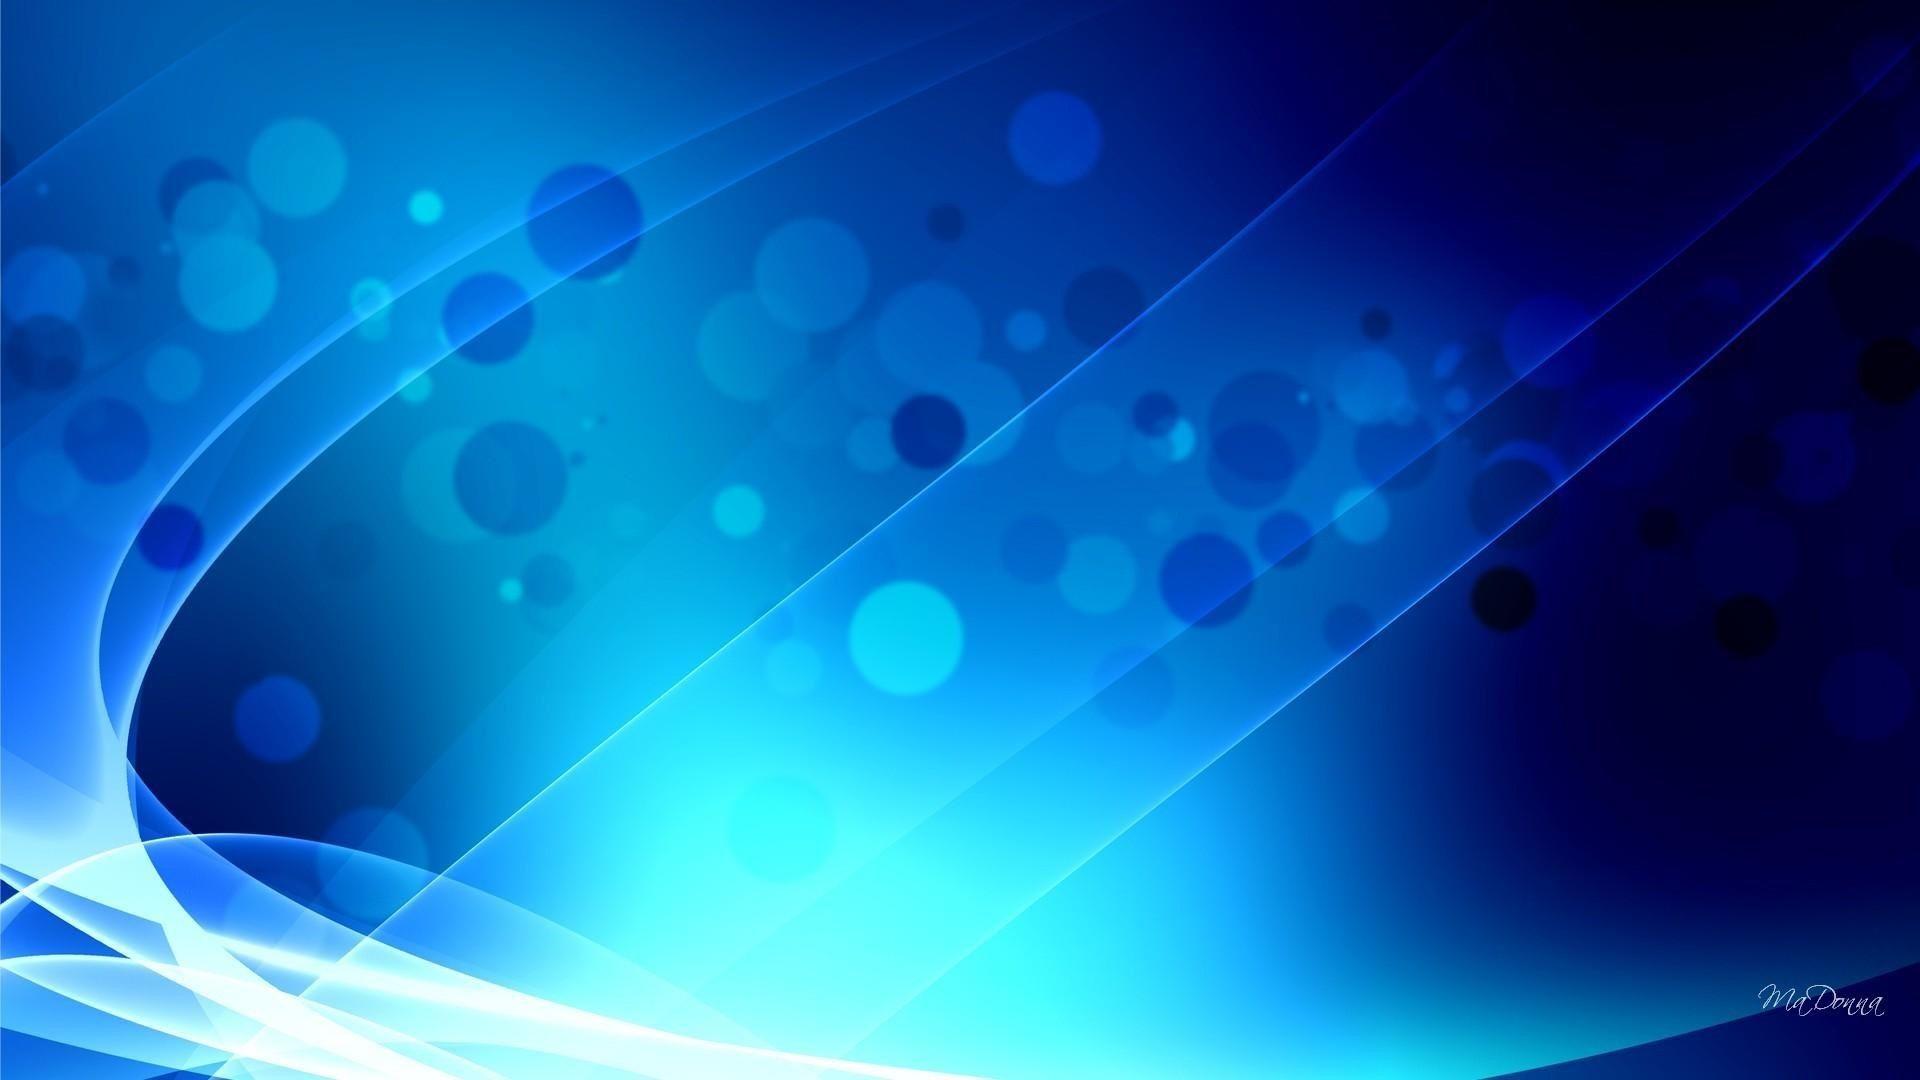 Blue Abstract HD Wallpapers - Top Free Blue Abstract HD Backgrounds